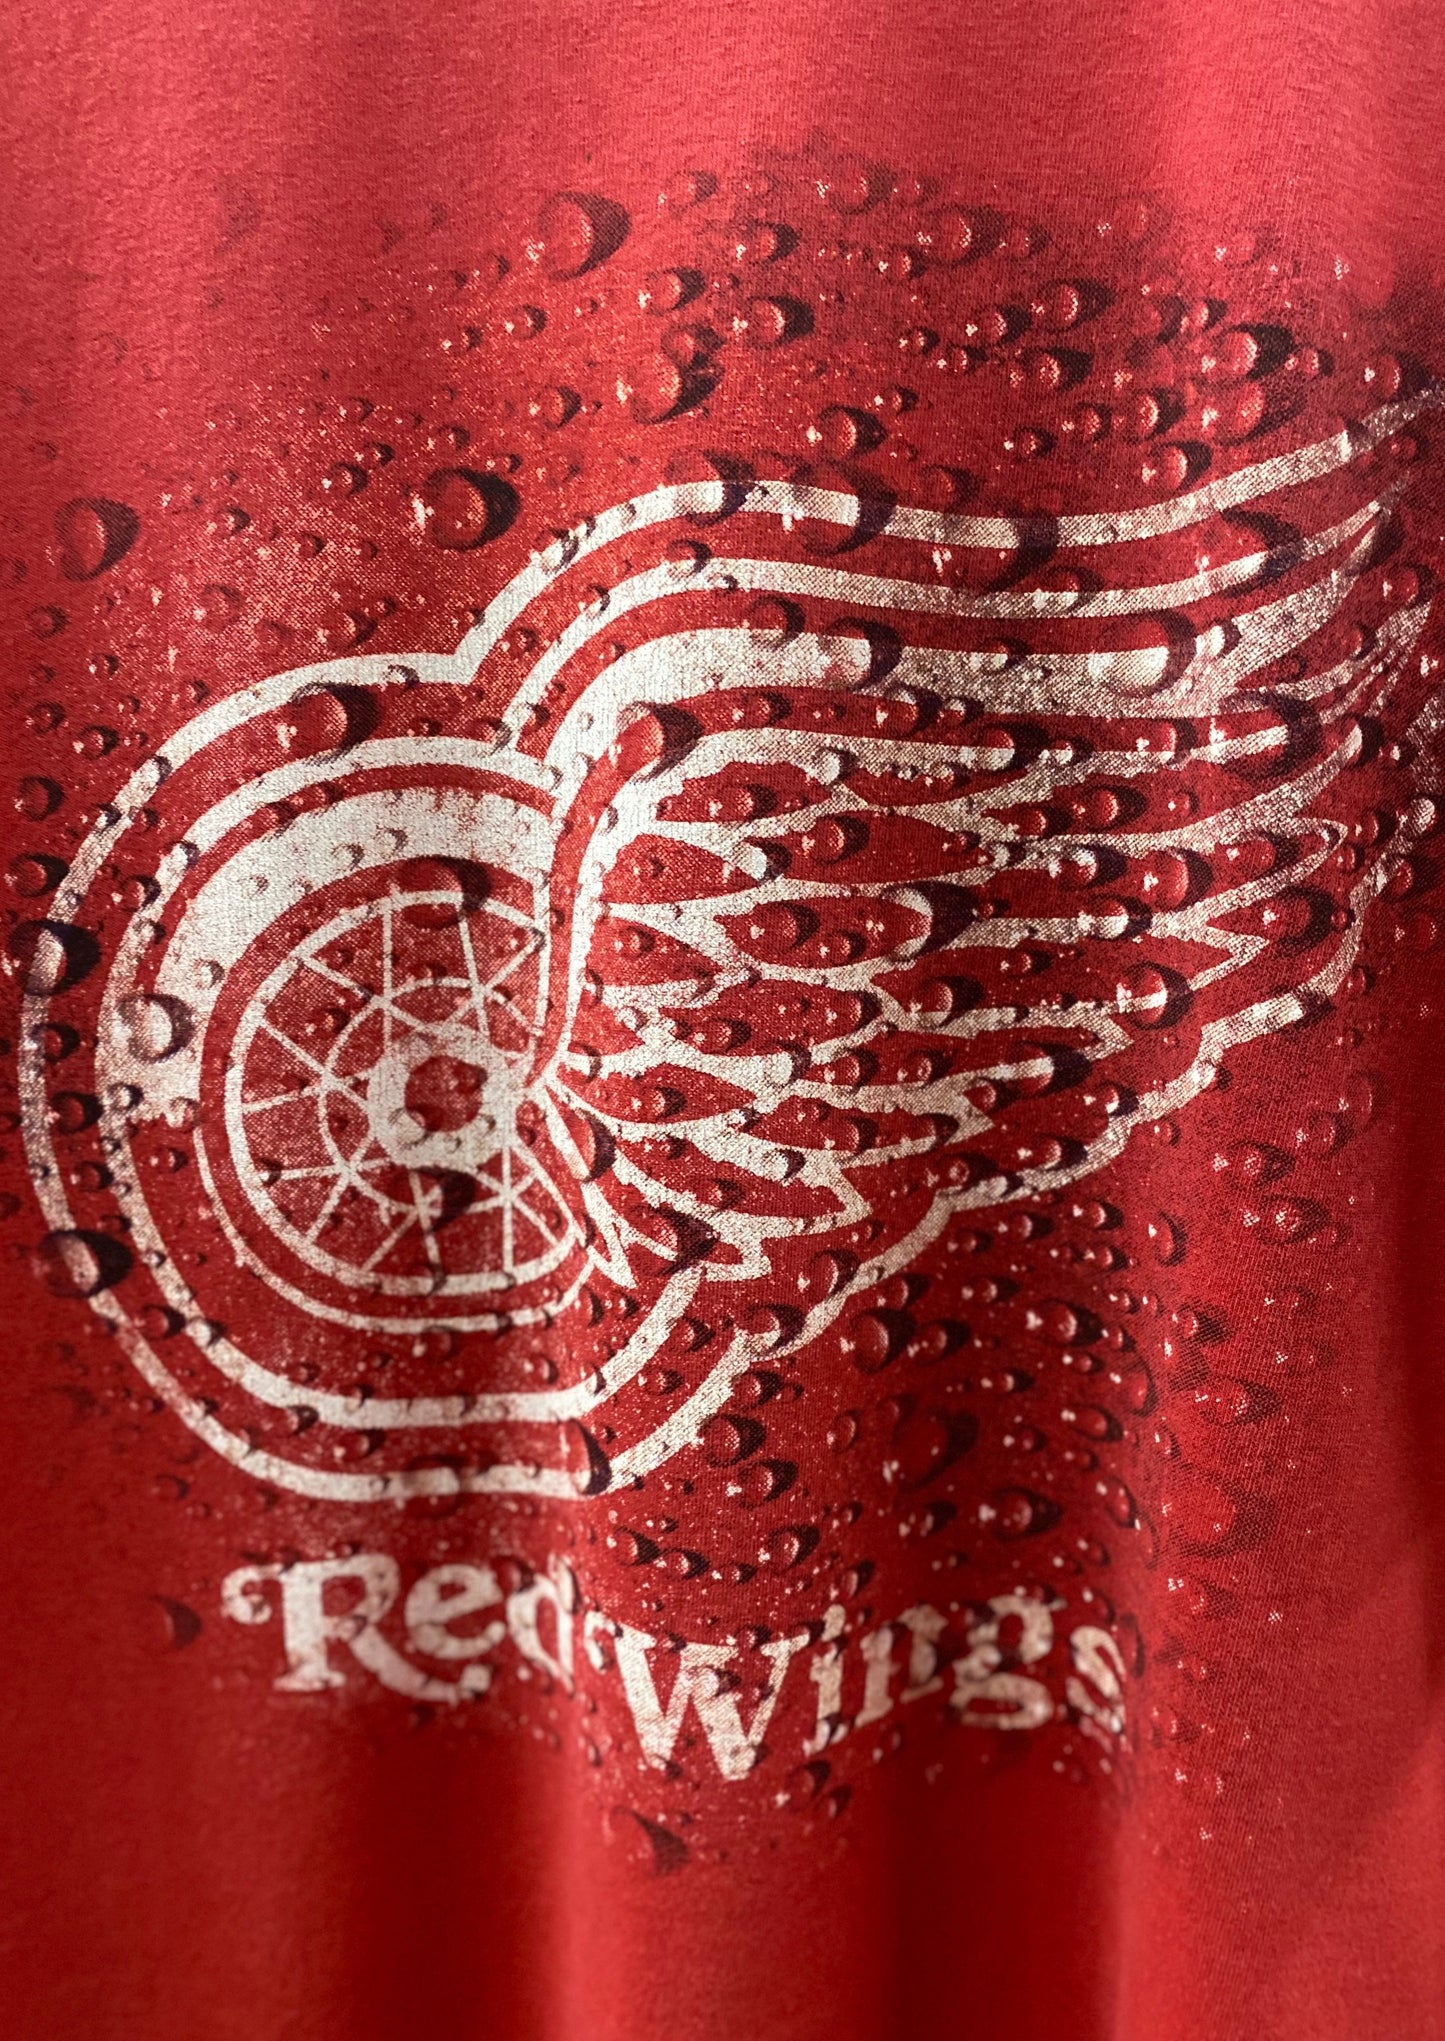 Load image into Gallery viewer, Redwings Water Logo T-shirt (4811529224272)
